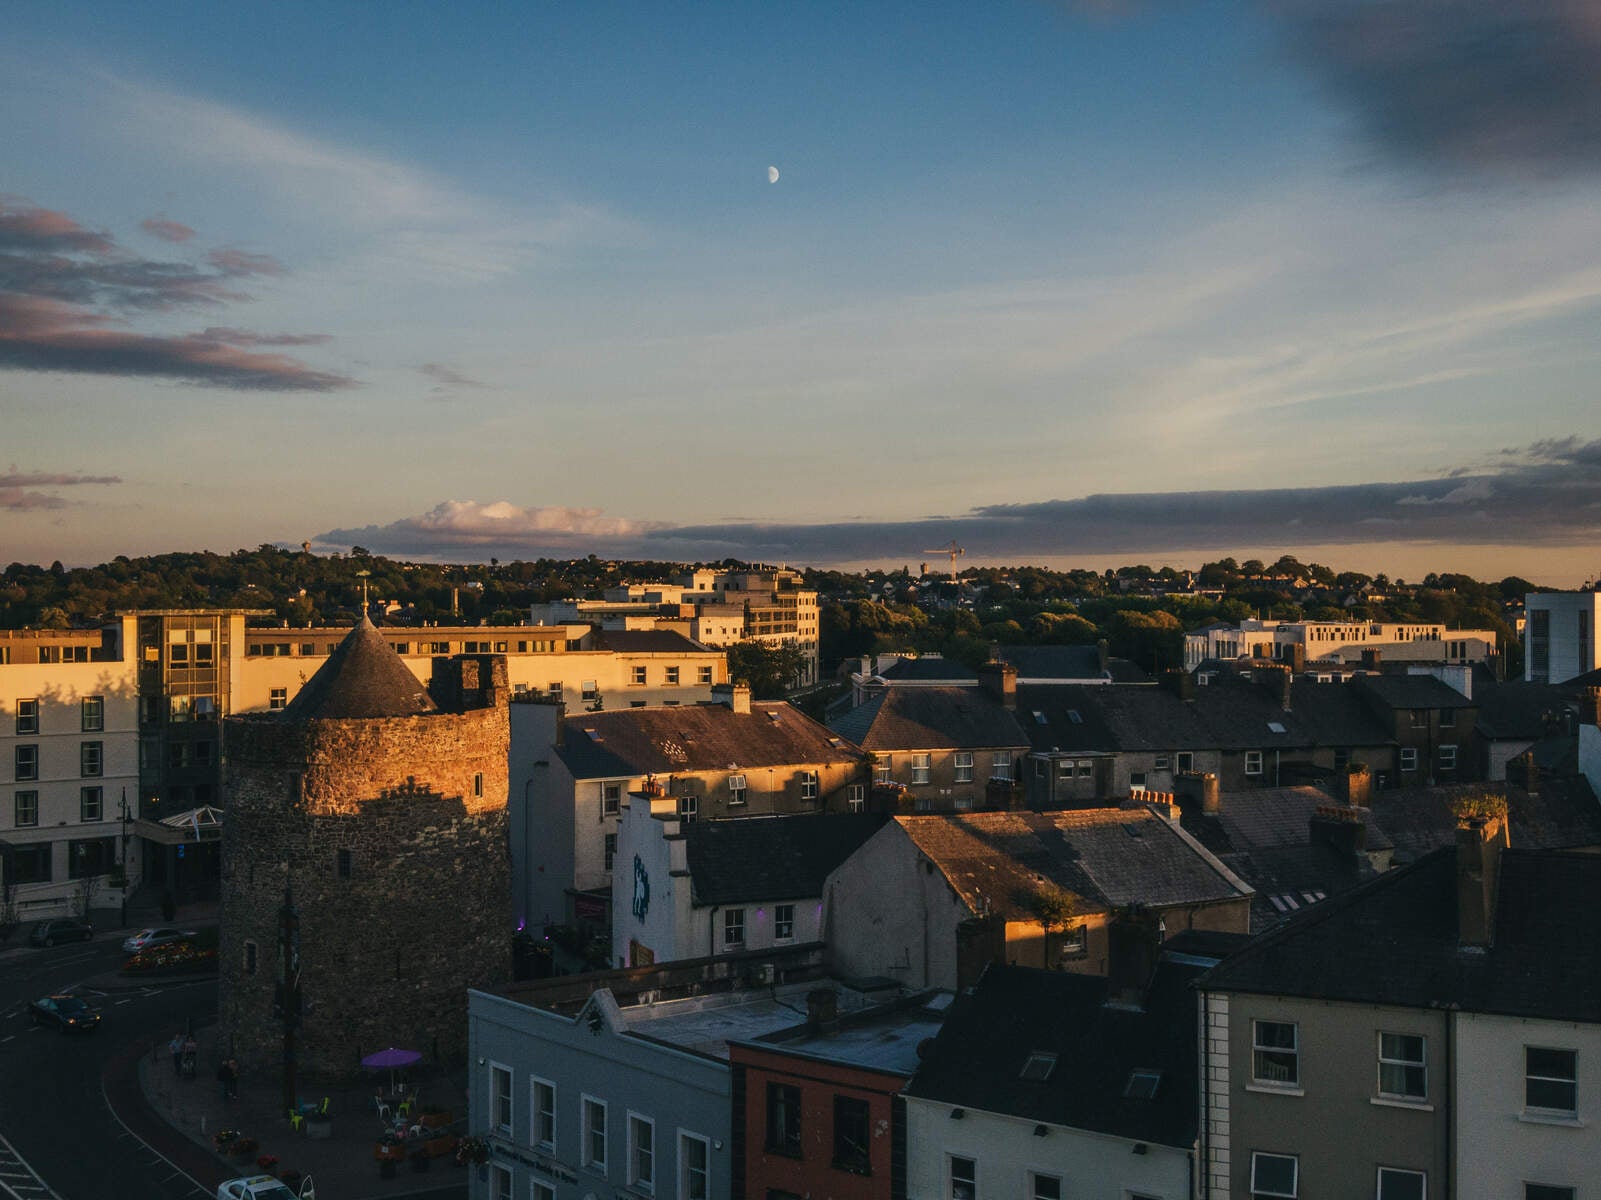 Waterford is Ireland’s oldest city